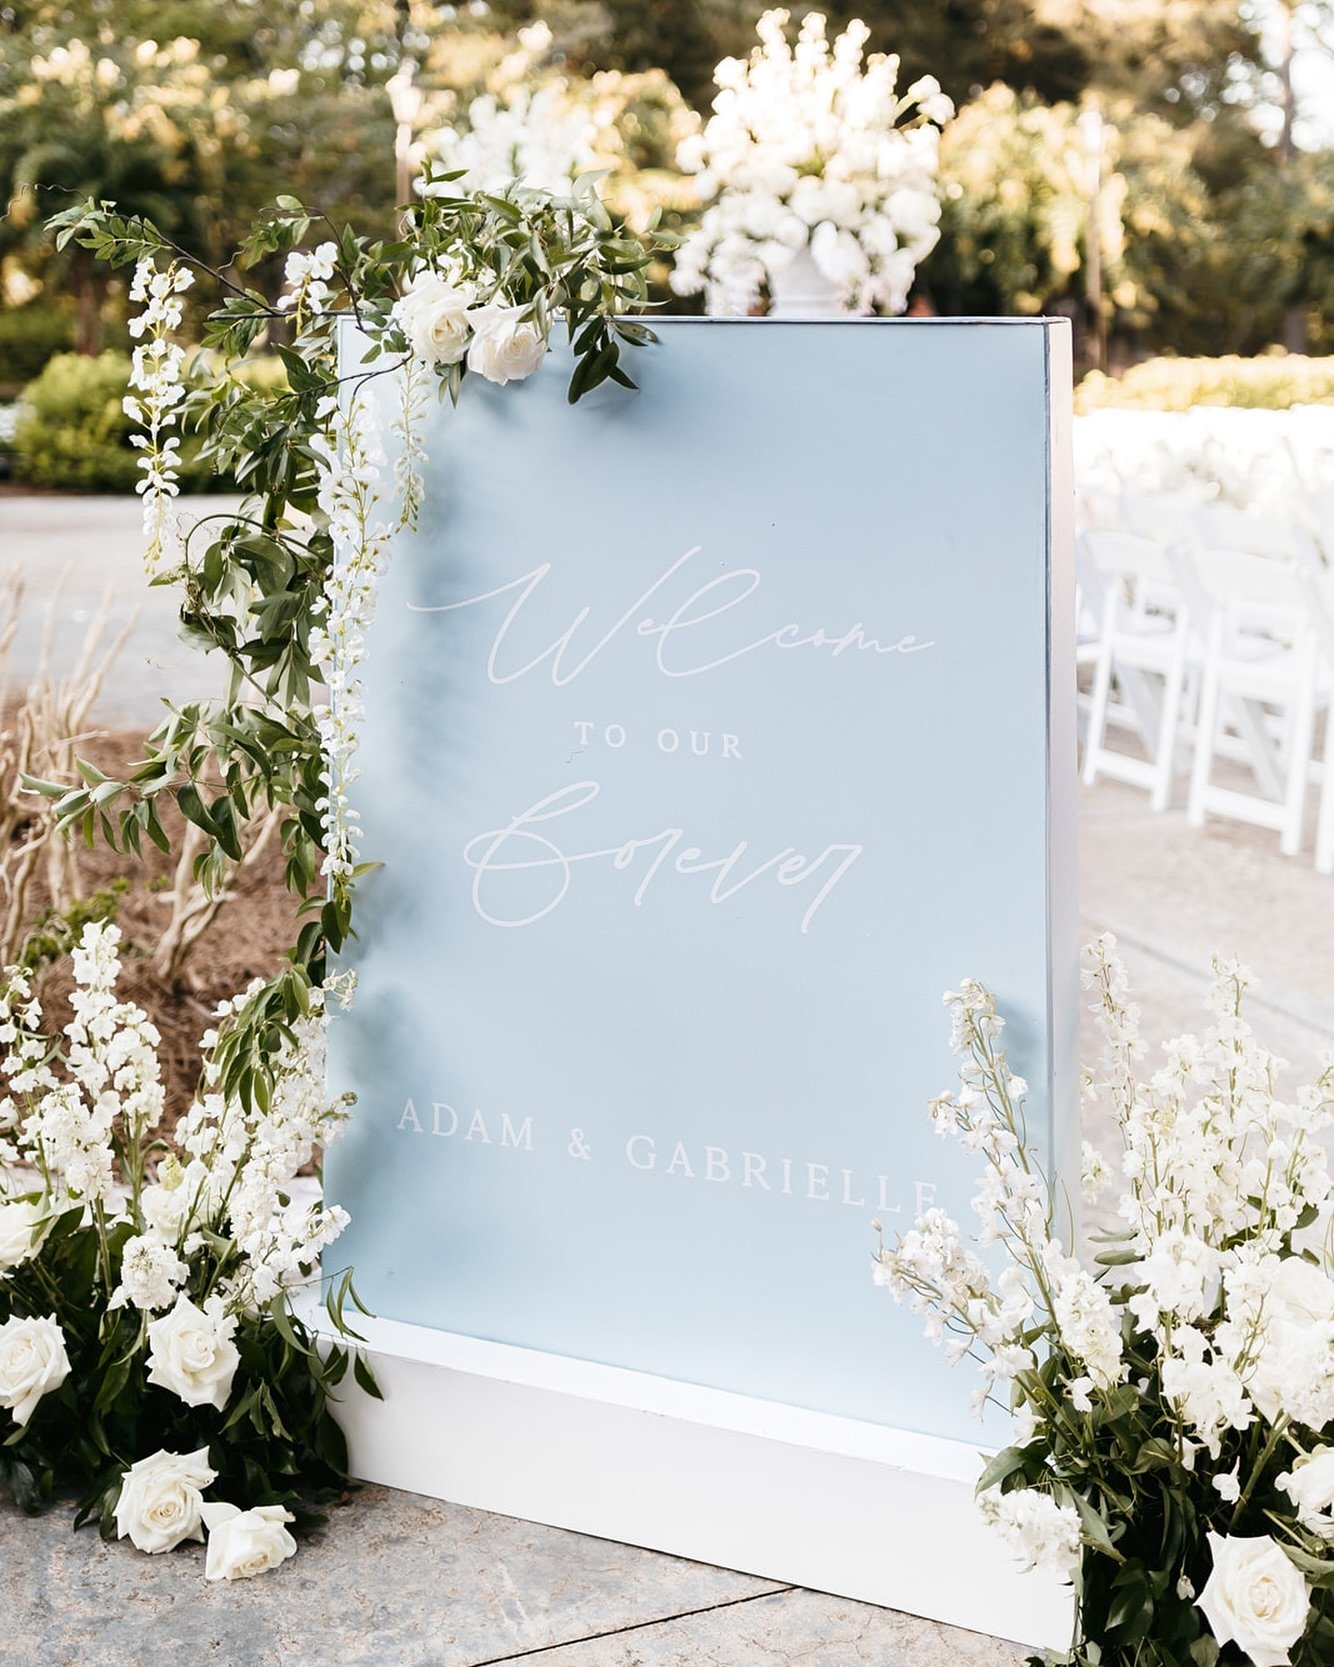 we&rsquo;ve been busy behind the scenes lately, but here&rsquo;s a pretty little welcome sign that deserves all the heart eyes 🤍